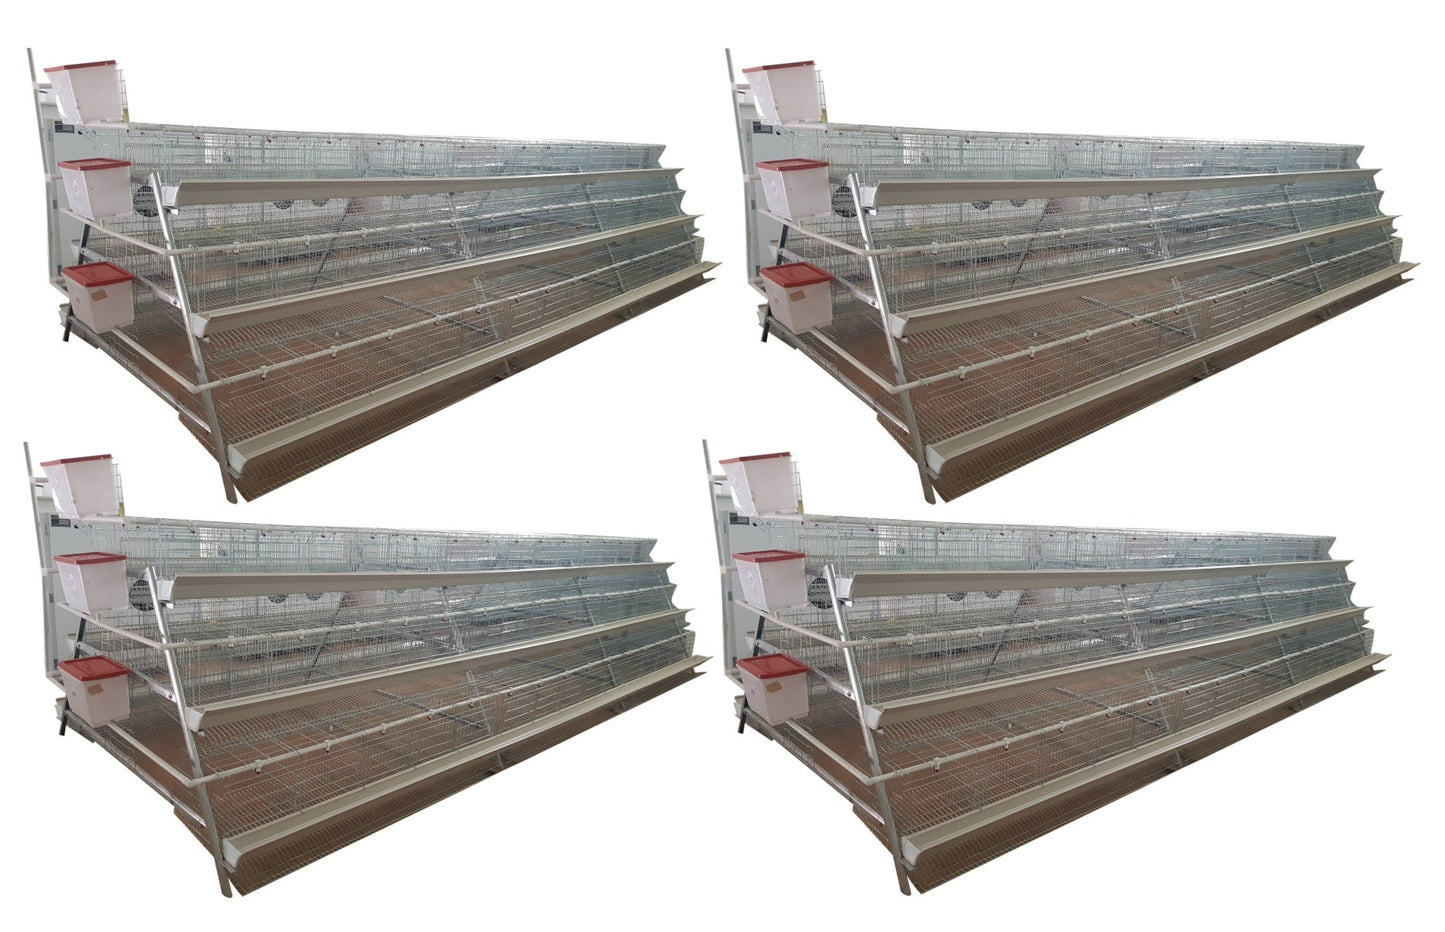 1440 Bird Egg Laying Cage - Elite Poultry Equipment